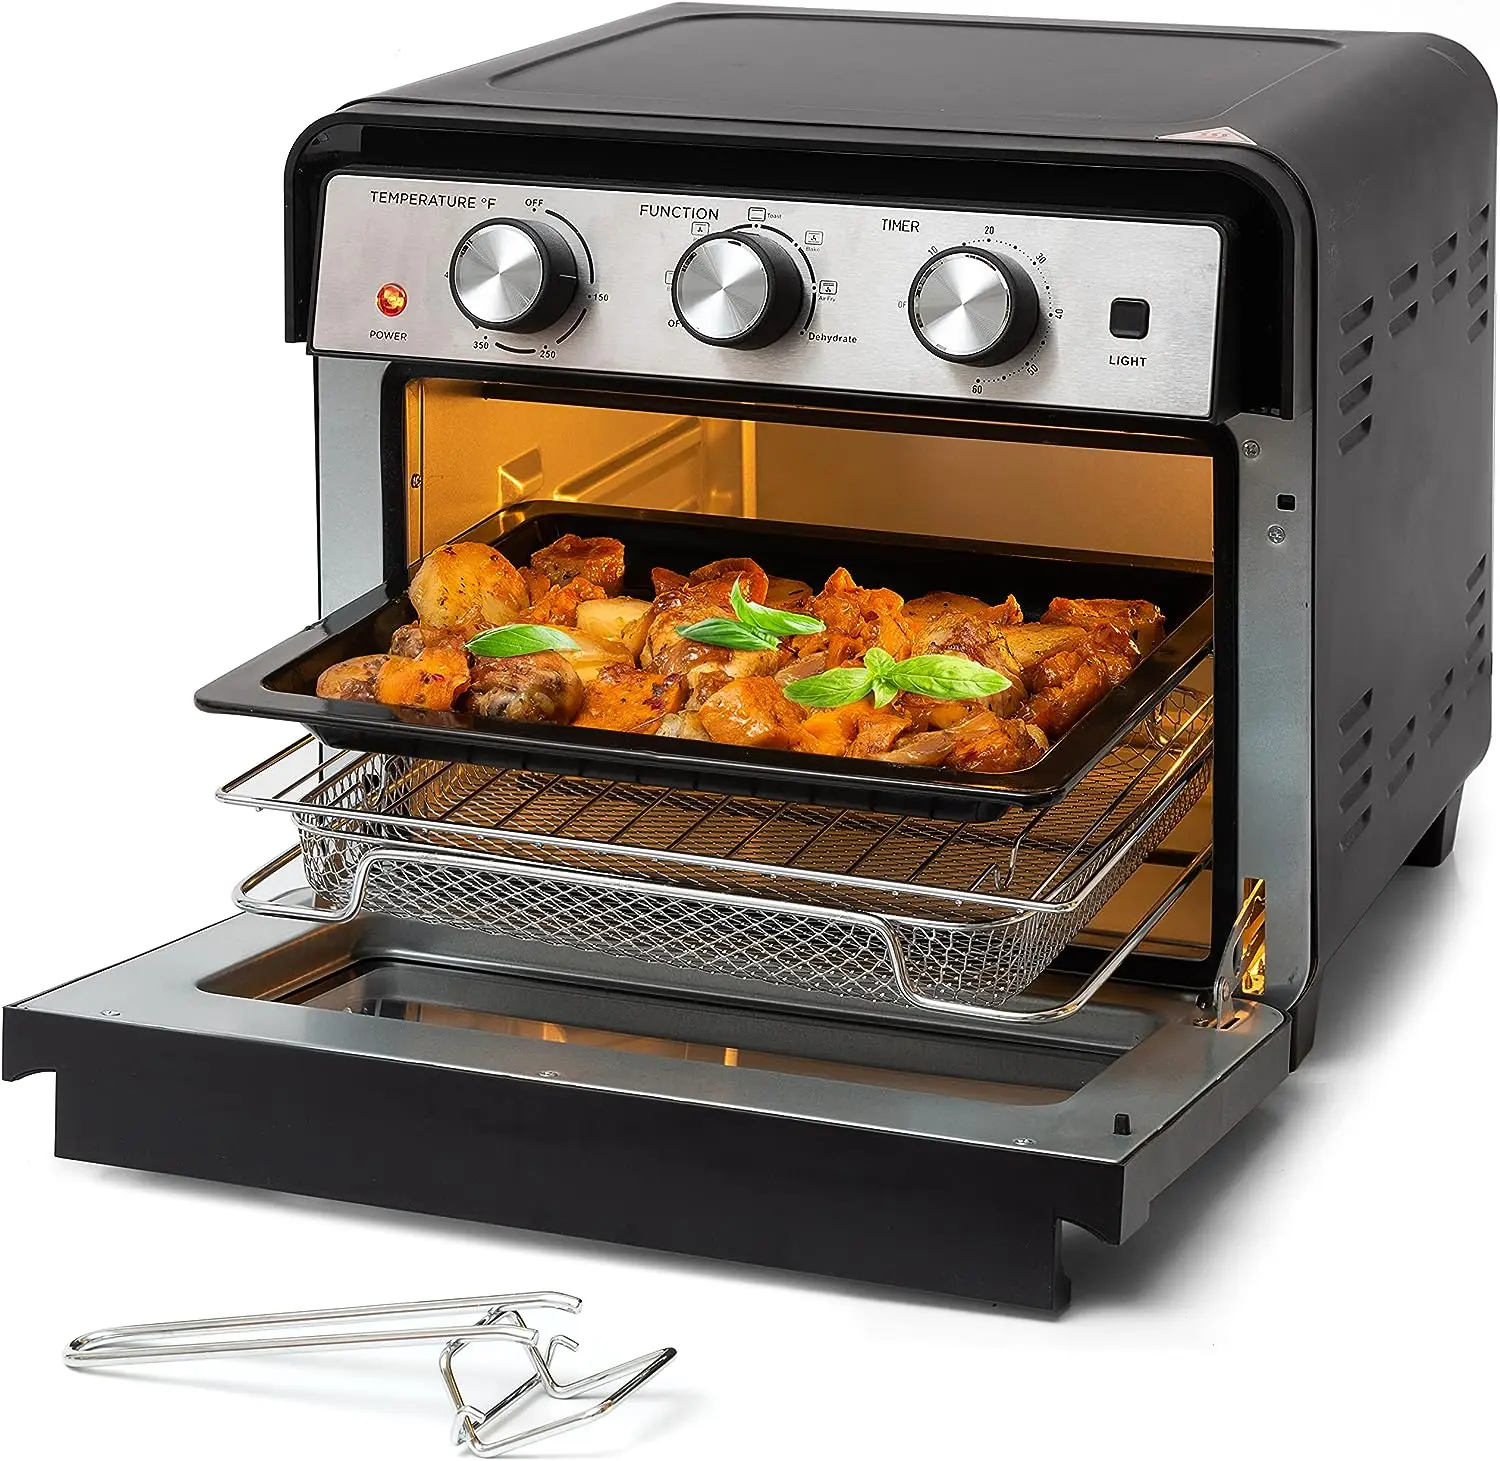 

Fryer Oven, 6-in-1 Toaster Oven 23 Quart, Airfryer Toaster Oven For Roast, Bake, Broil, Stainless Steel Accessories Included, Co